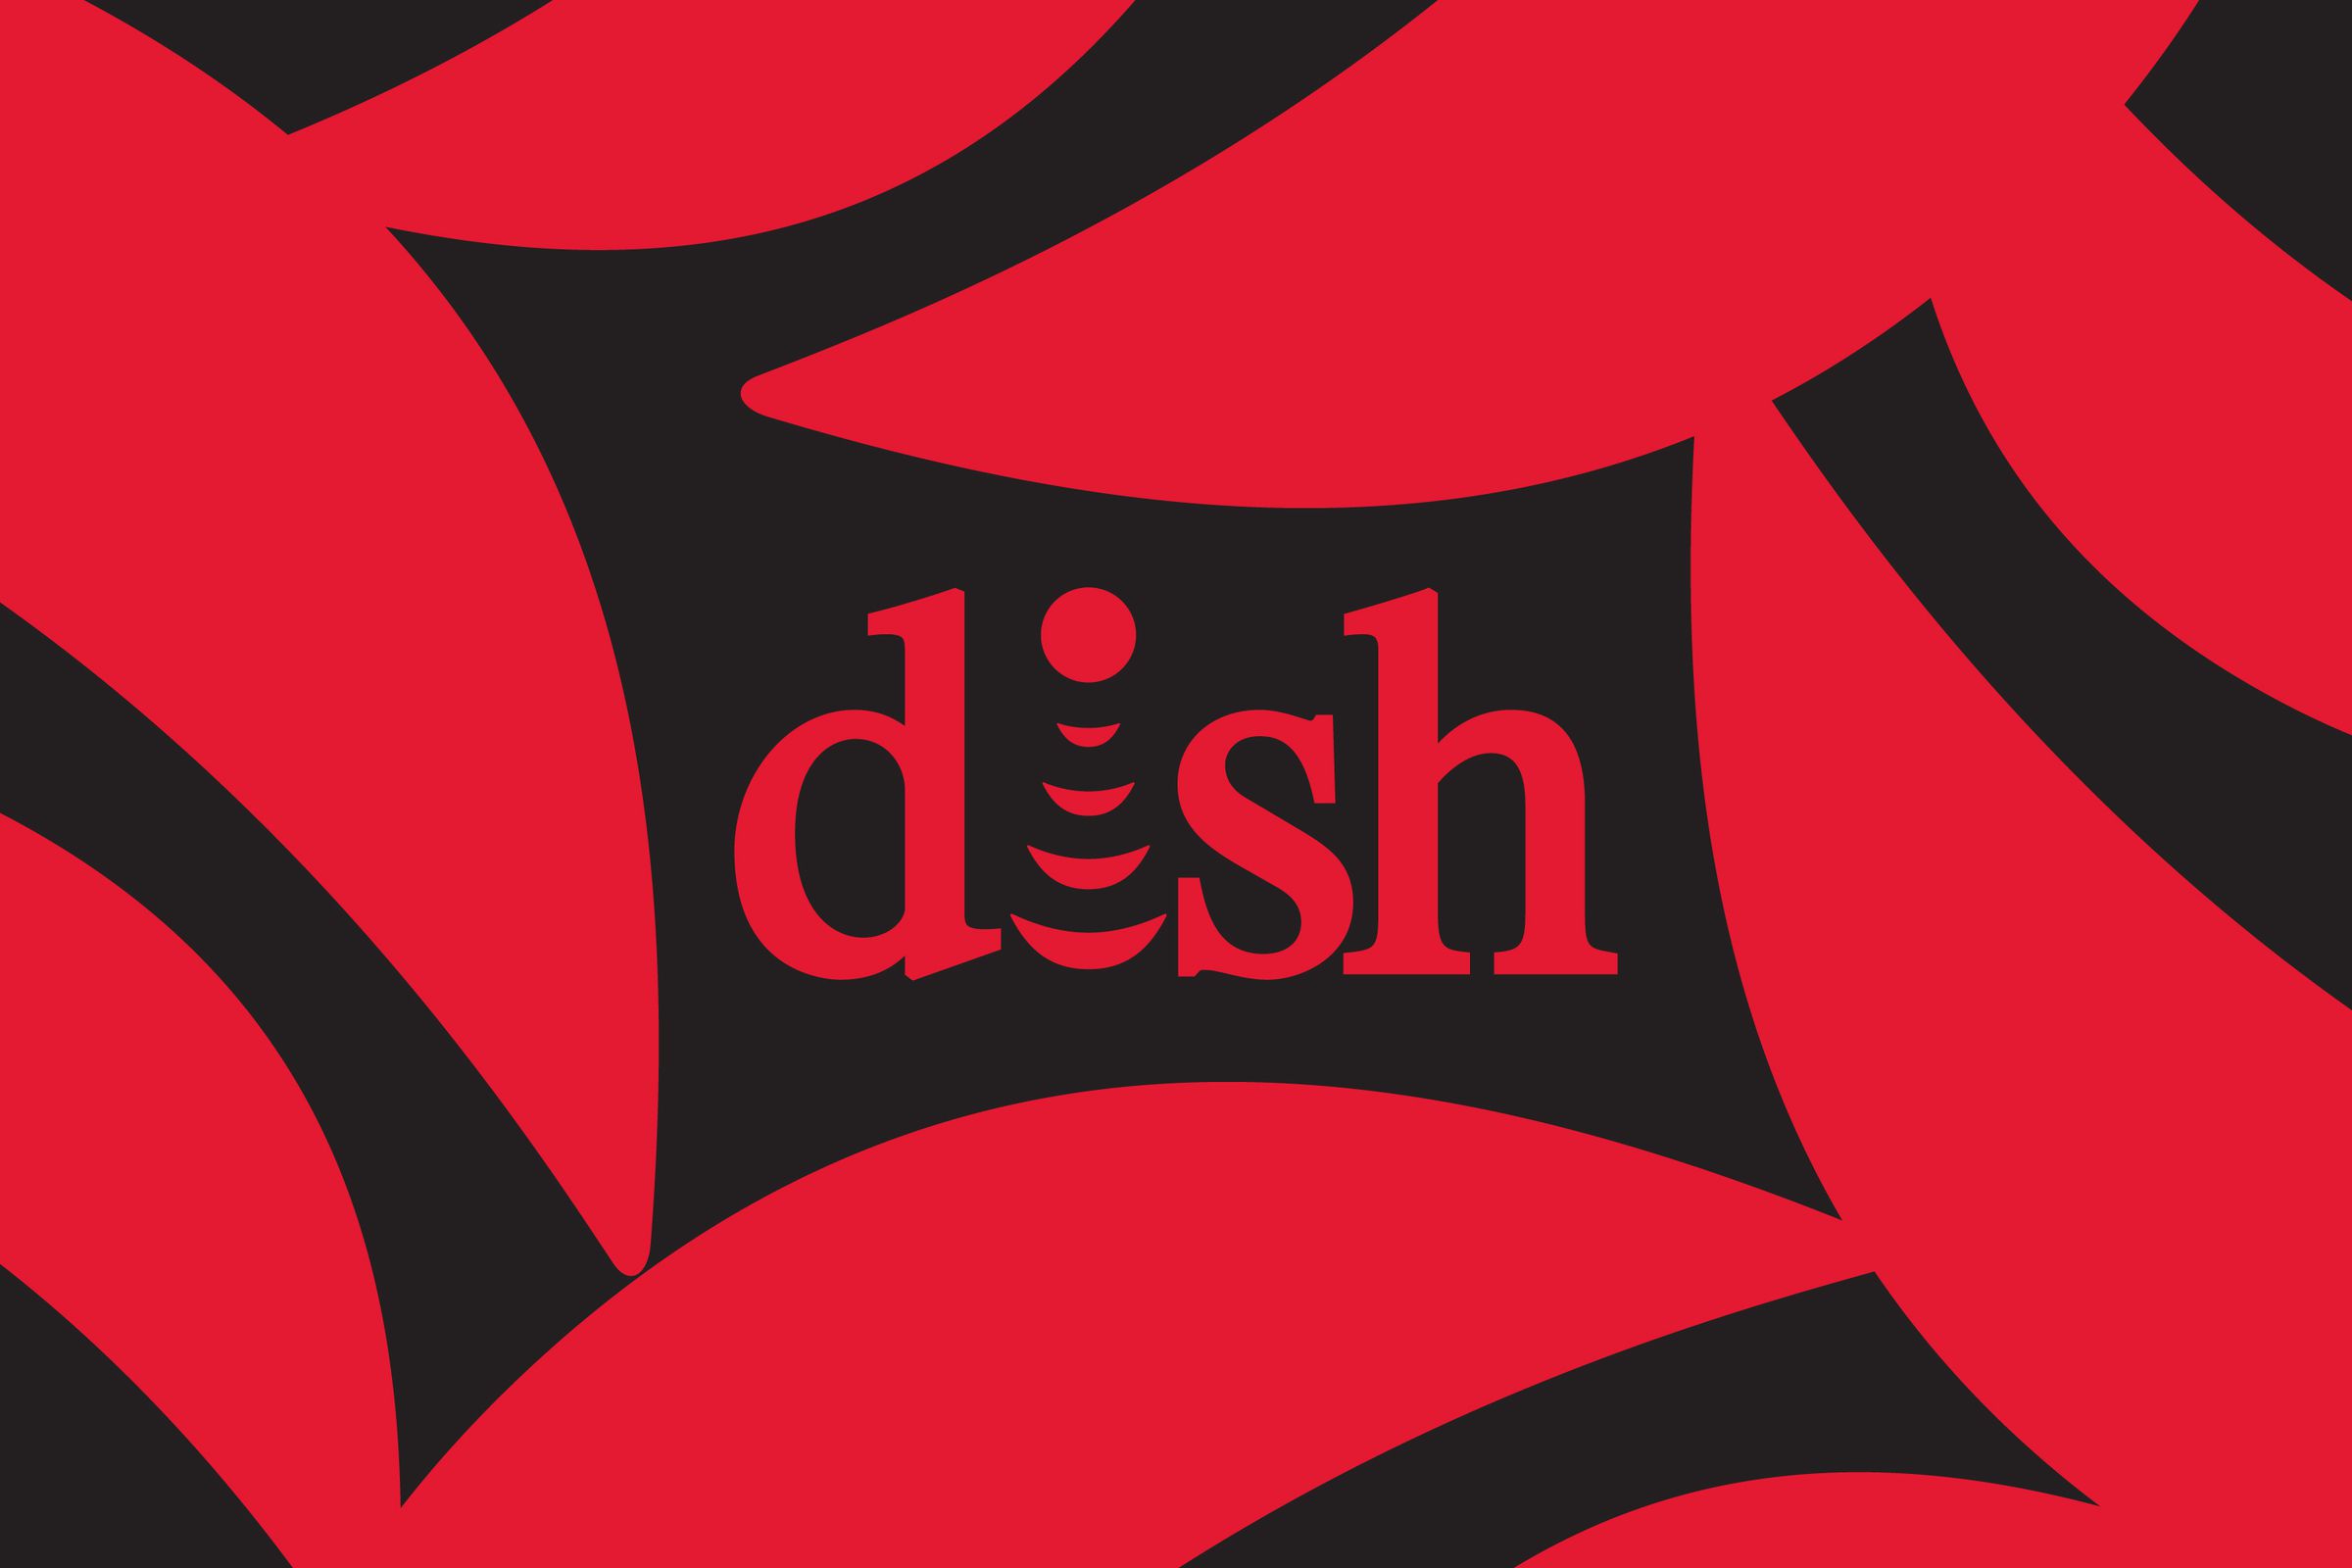 Illustration of the Dish wordmark on a black and red background.